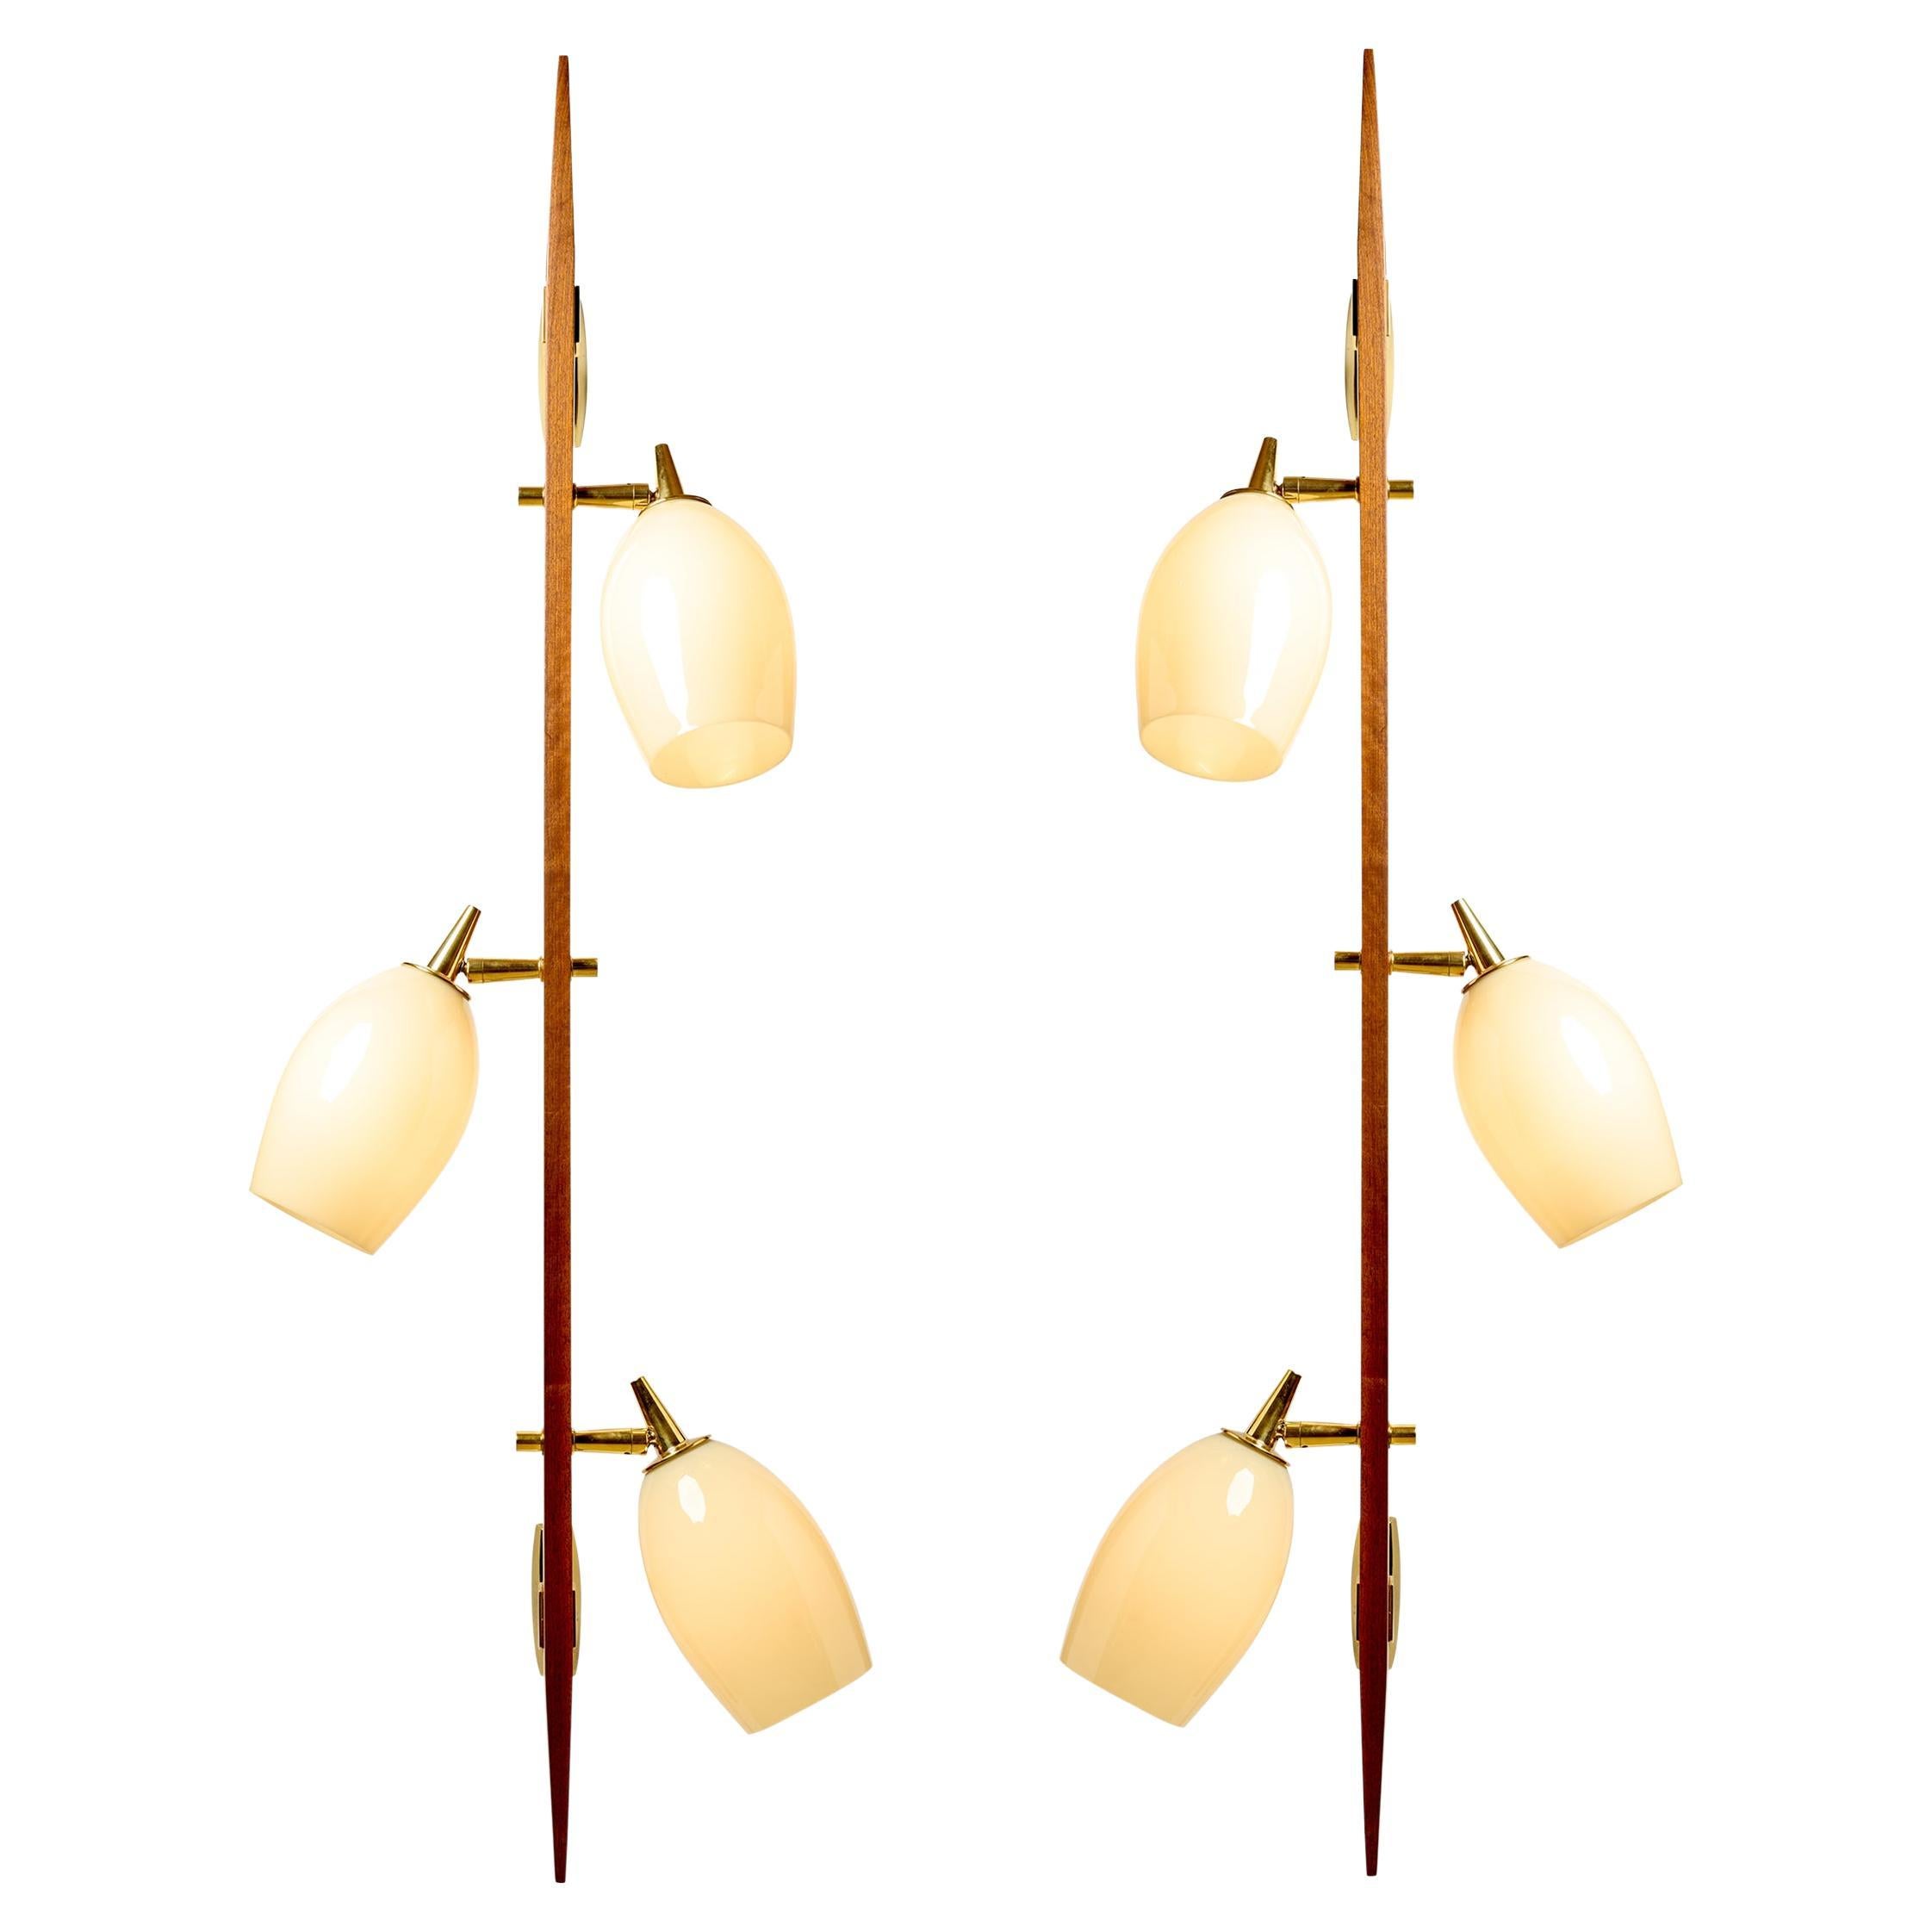 Pair of Wall Sconces in the Style of Paavo Tynell, 1950s